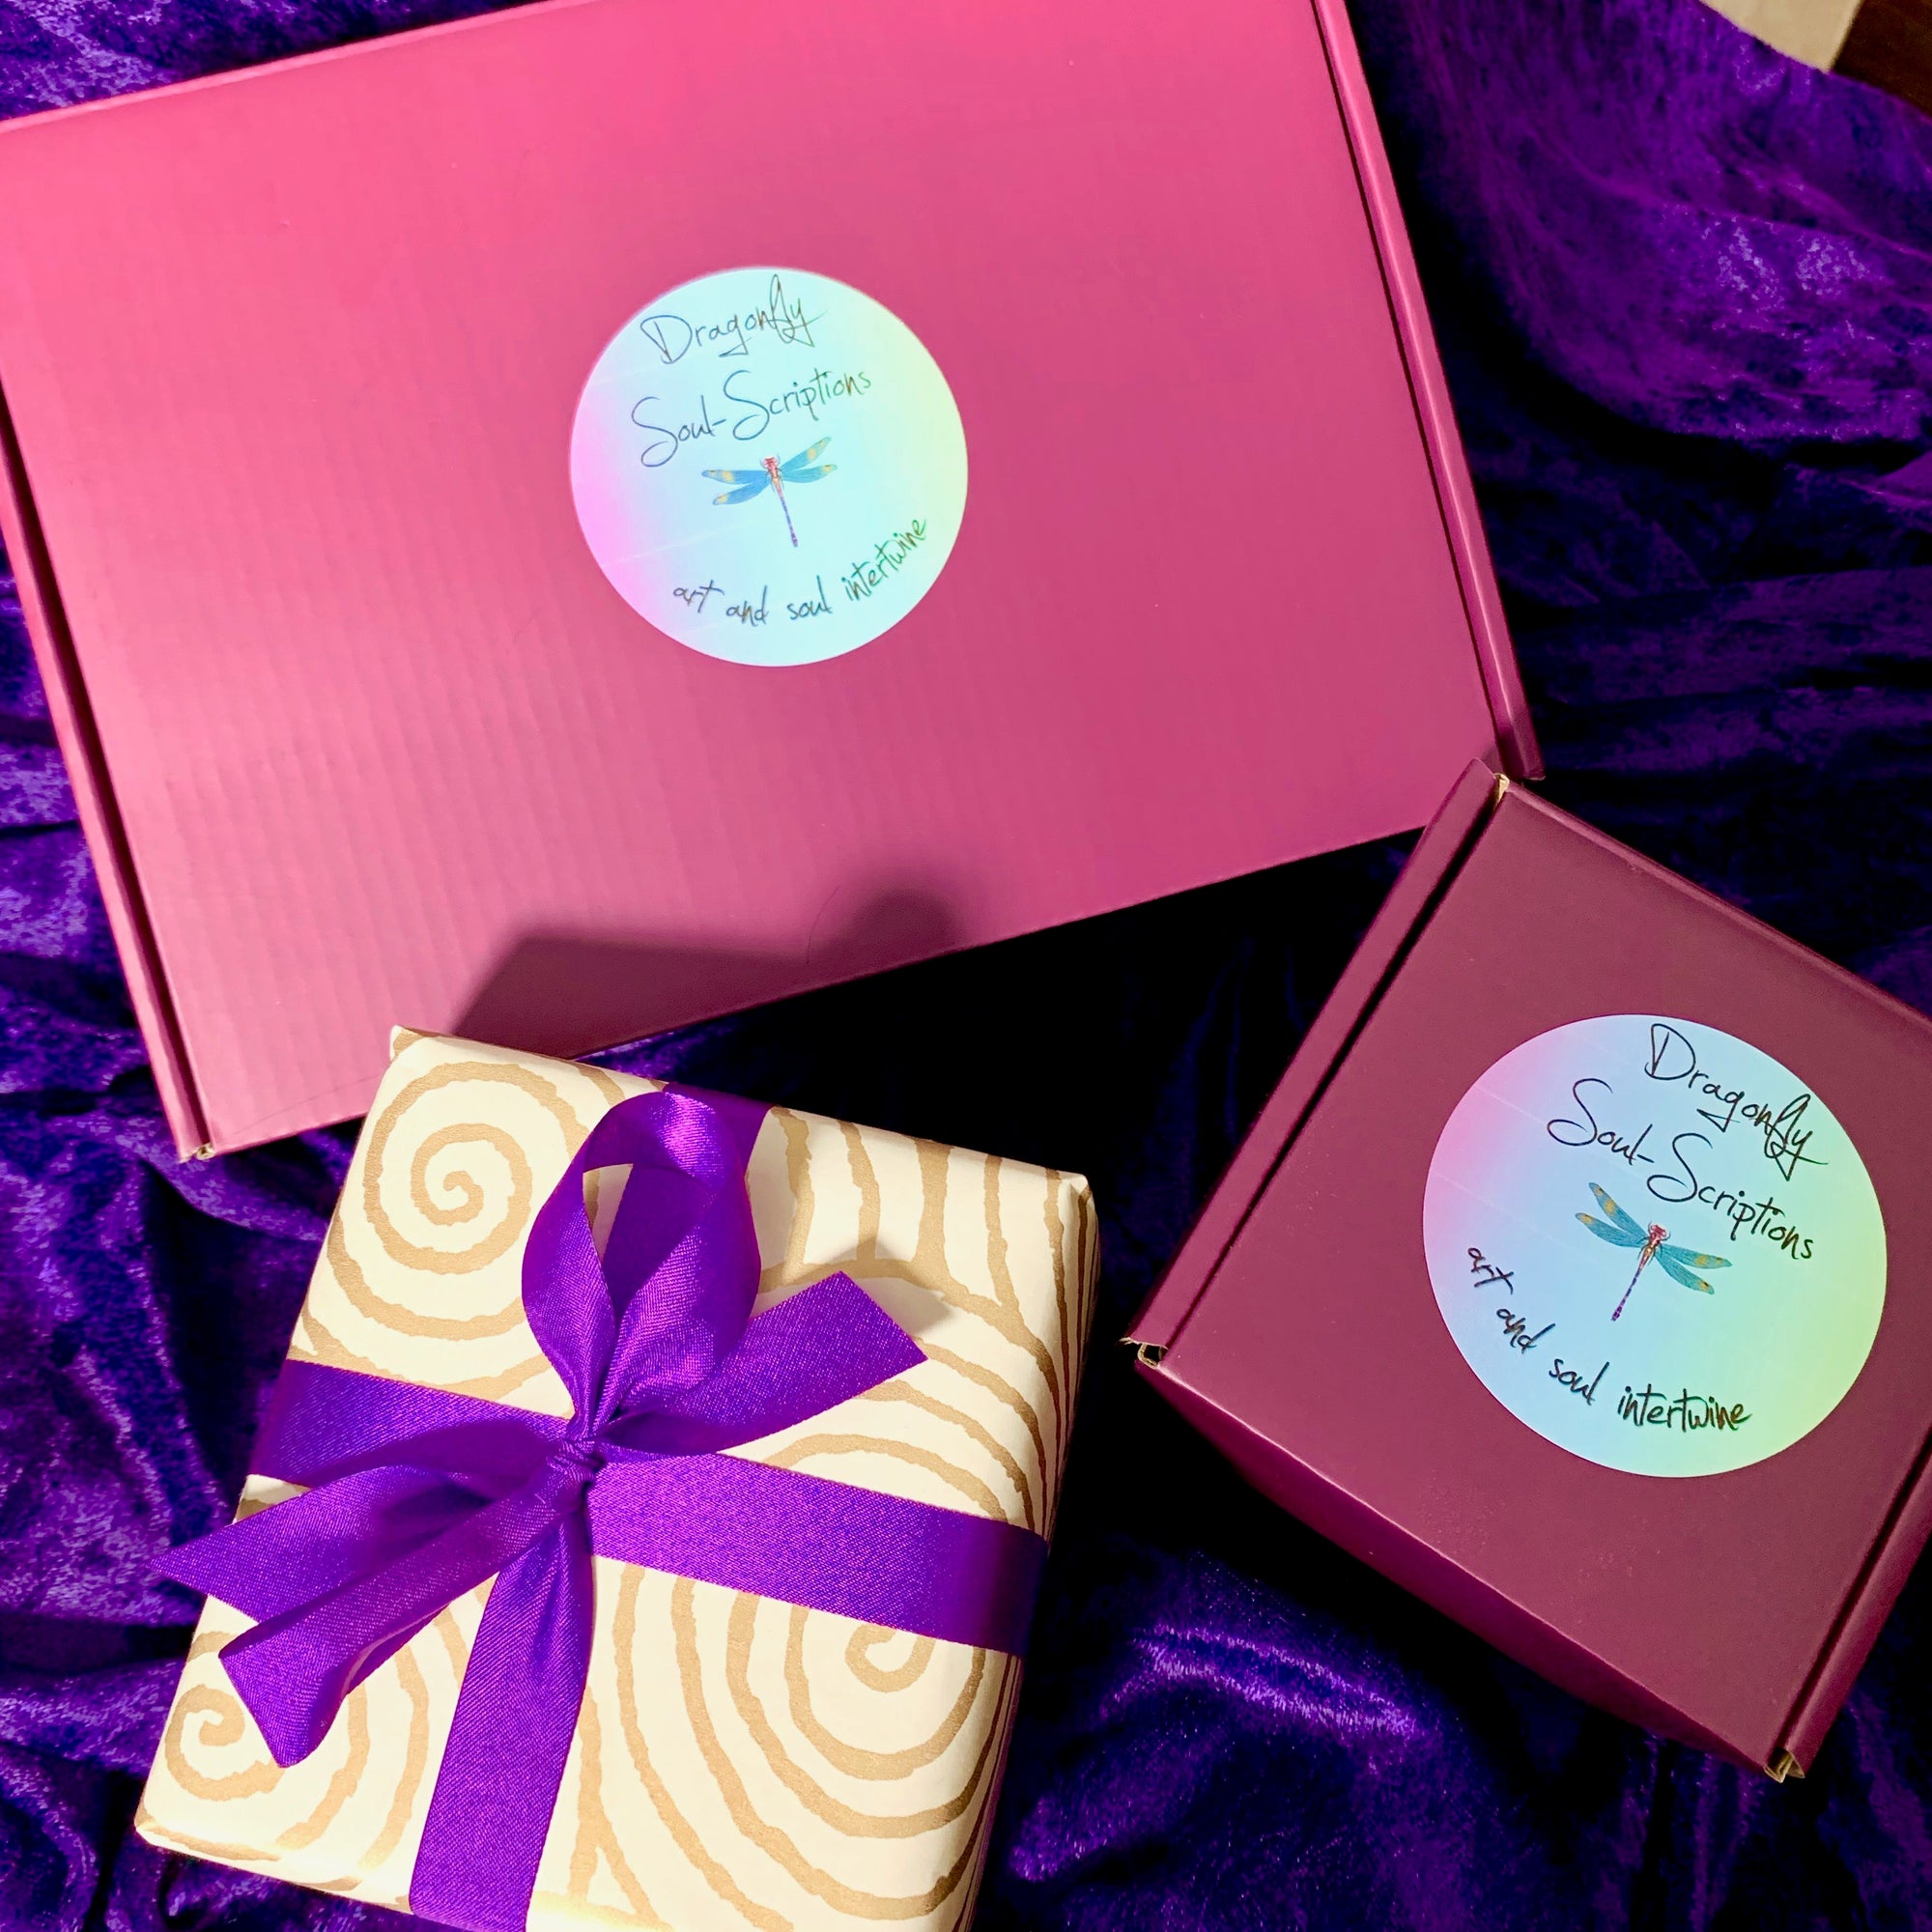 A purple Mystery Box labeled with a decorative design around the text. The label reads: "There are no wrong choices... Choose the one that speaks to your soul." Several other purple Mystery Boxes, each potentially hiding crystals or candles, are visible in the background.